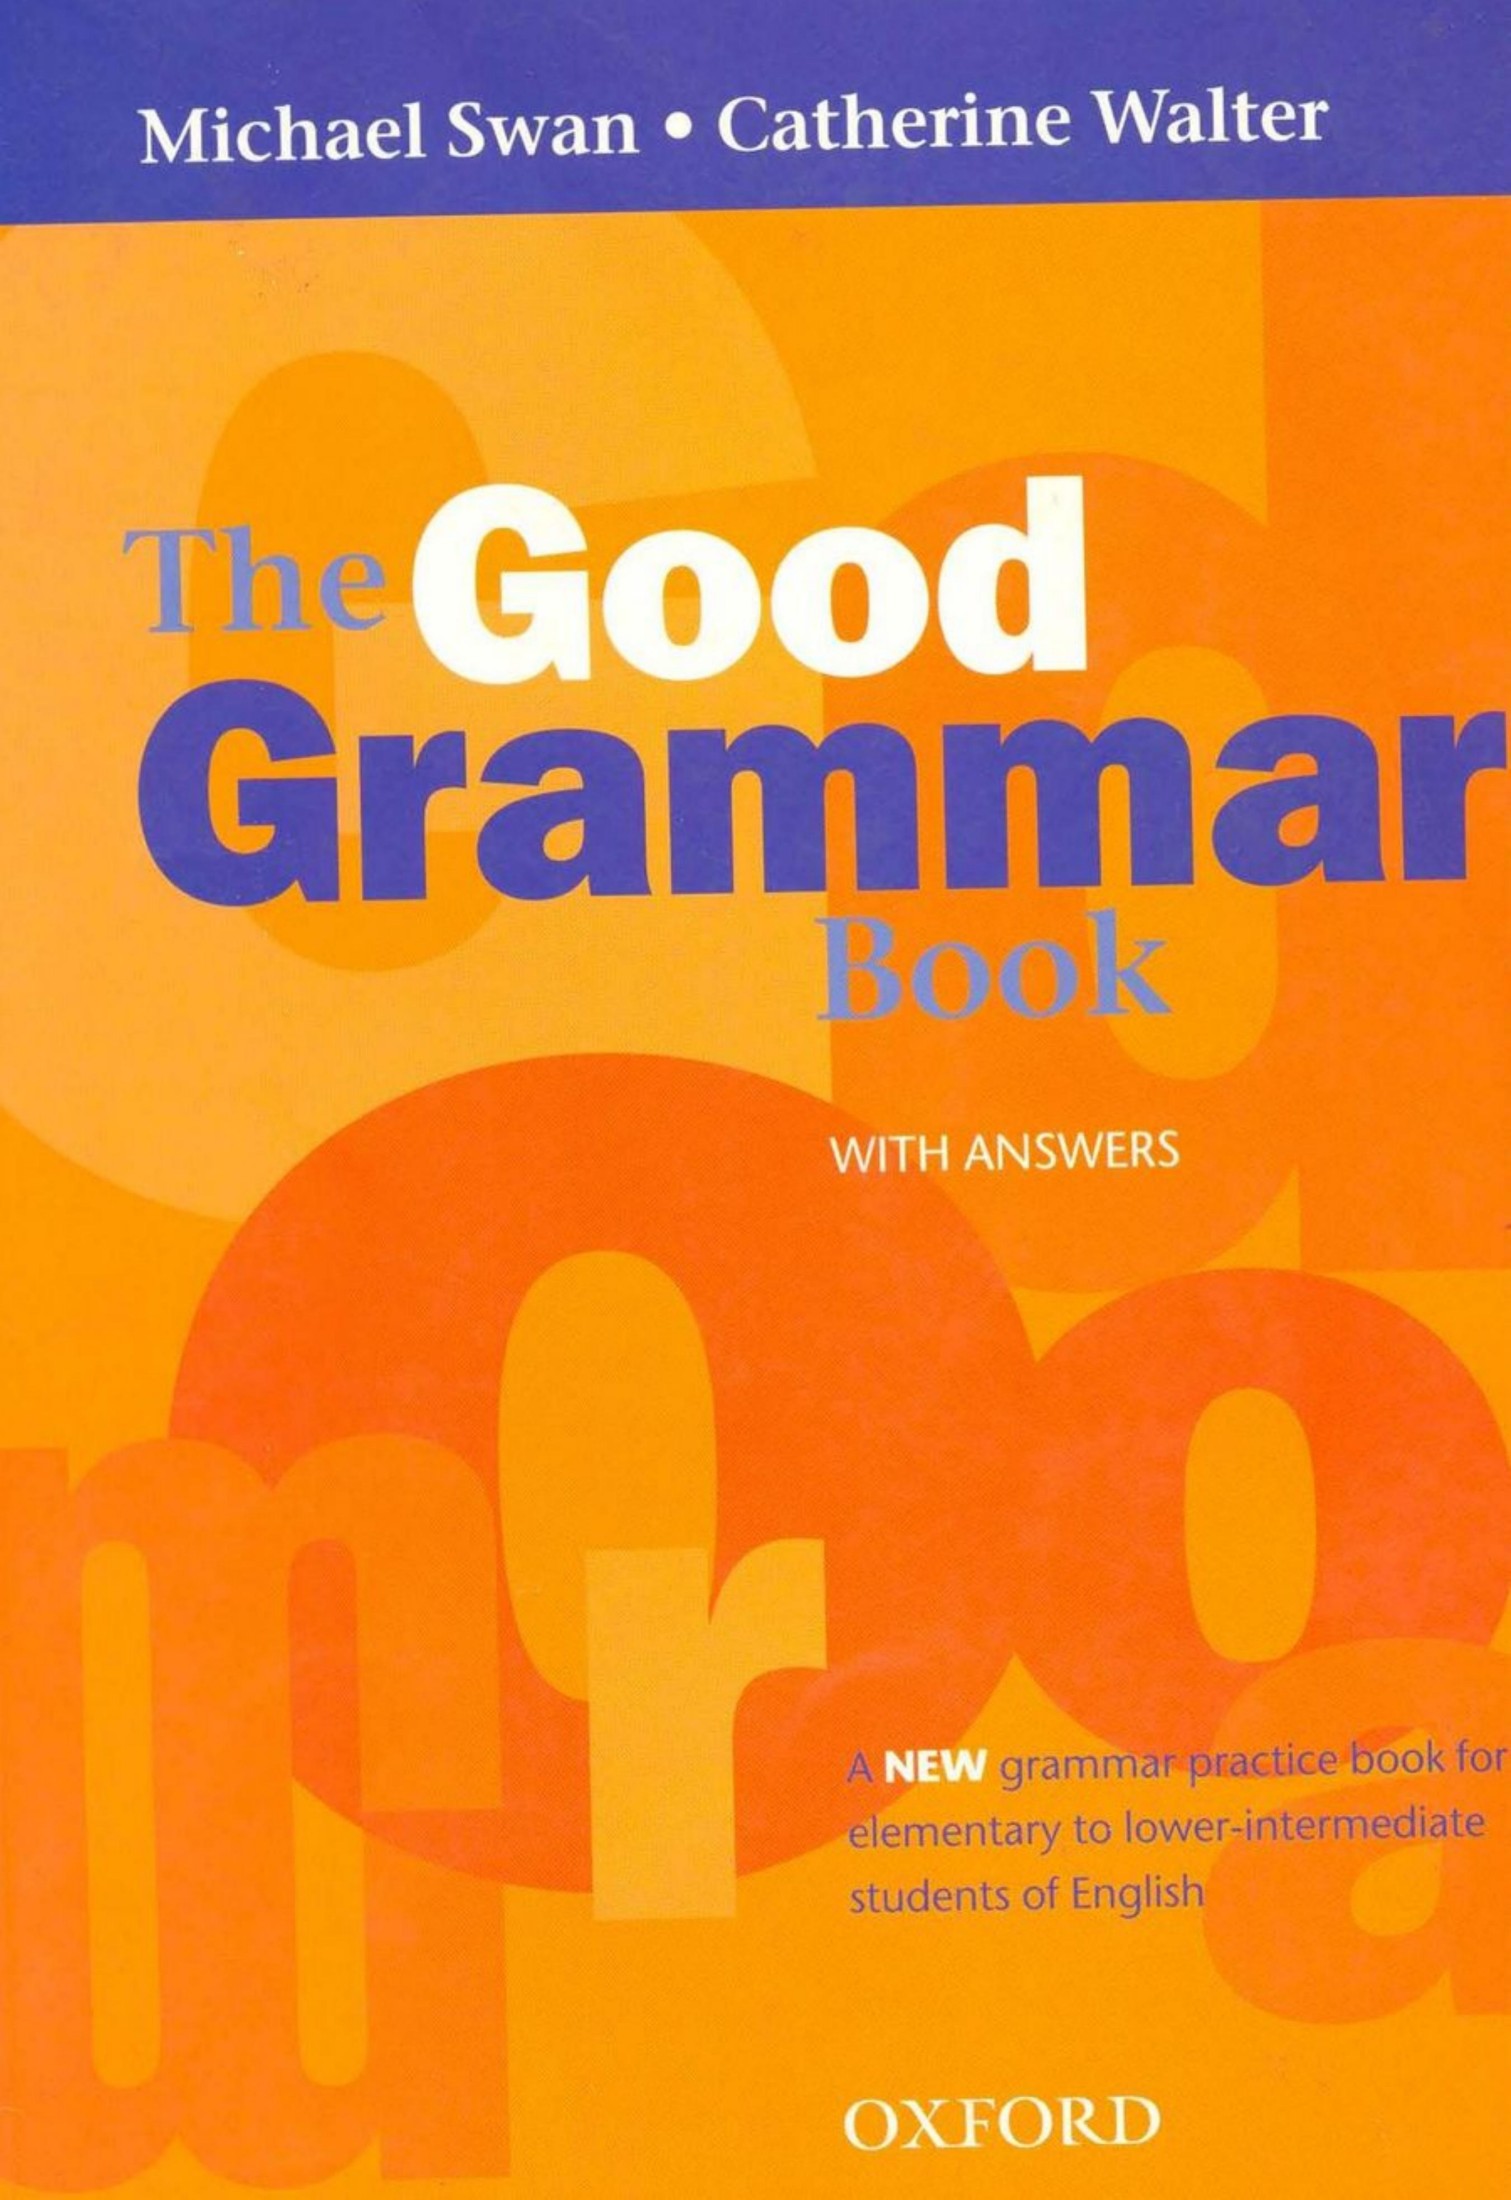 The Good Grammar - with Answers